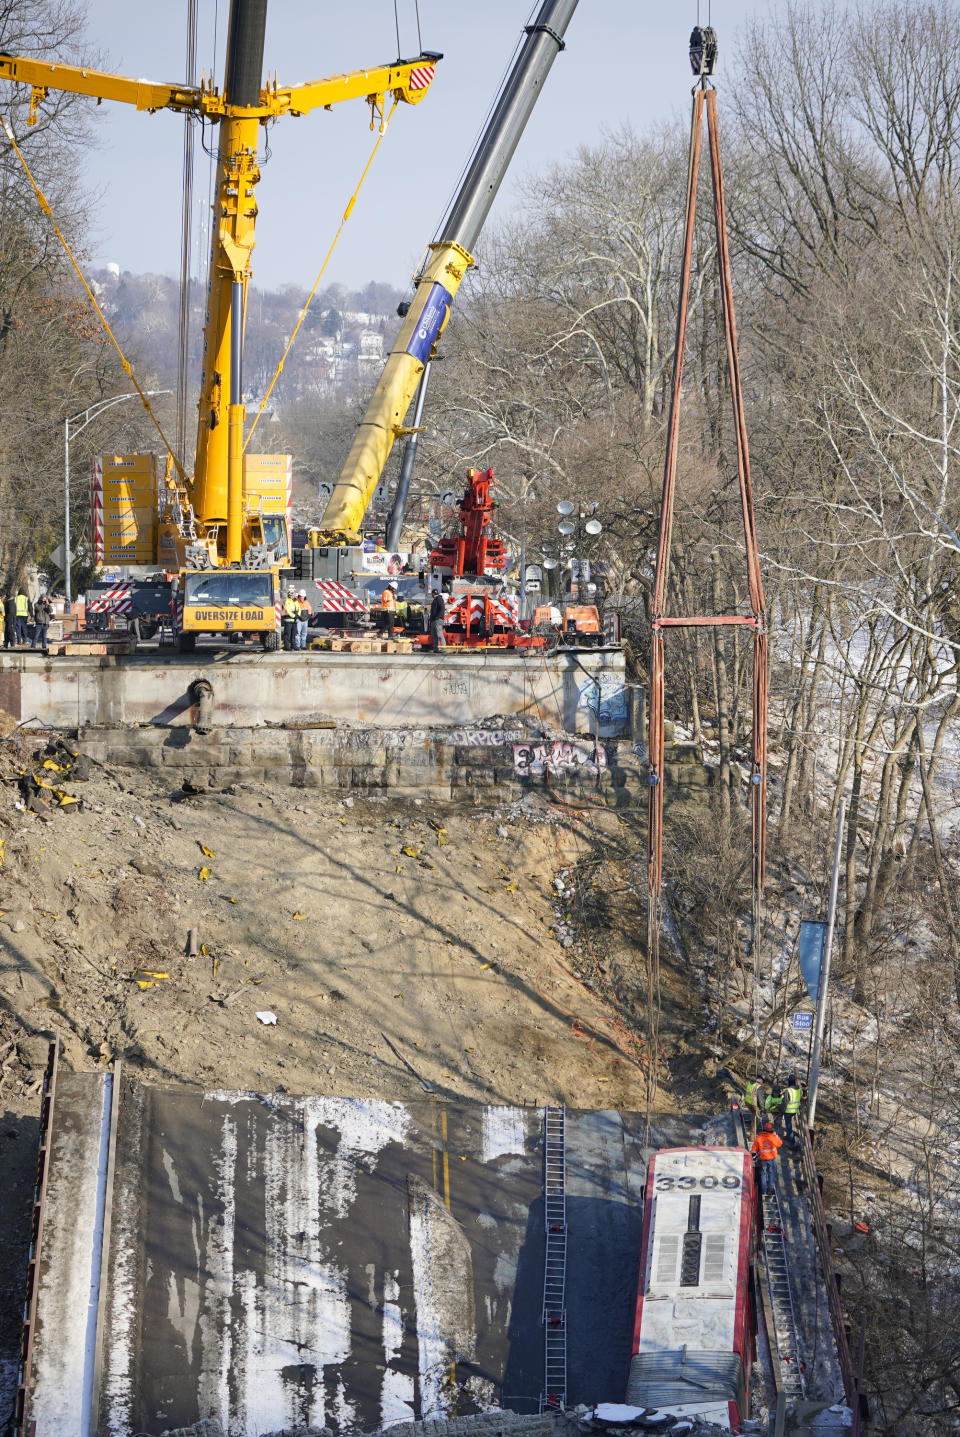 Workers prepare the bus, lower right, that was on a bridge when it collapsed Friday as they work to remove it with a crane during the recovery process on Monday Jan. 31, 2022 in Pittsburgh's East End. (AP Photo/Gene J. Puskar)